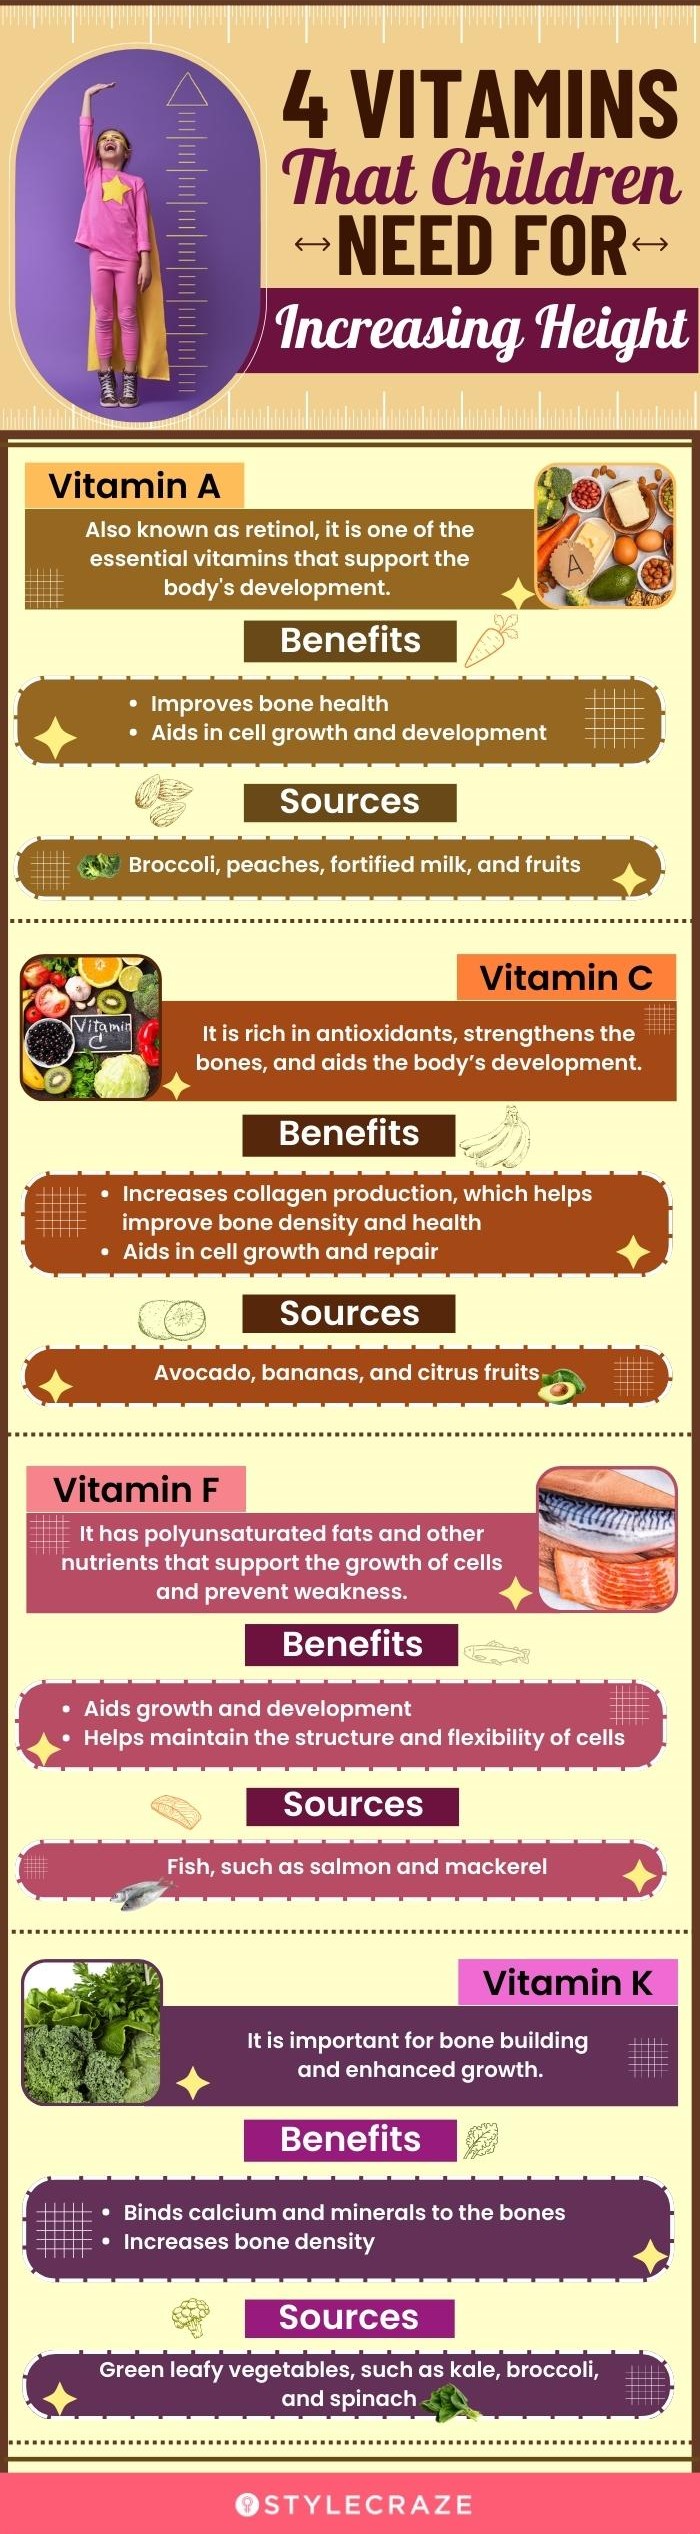 4 vitamins that children need for increasing height [infographic]